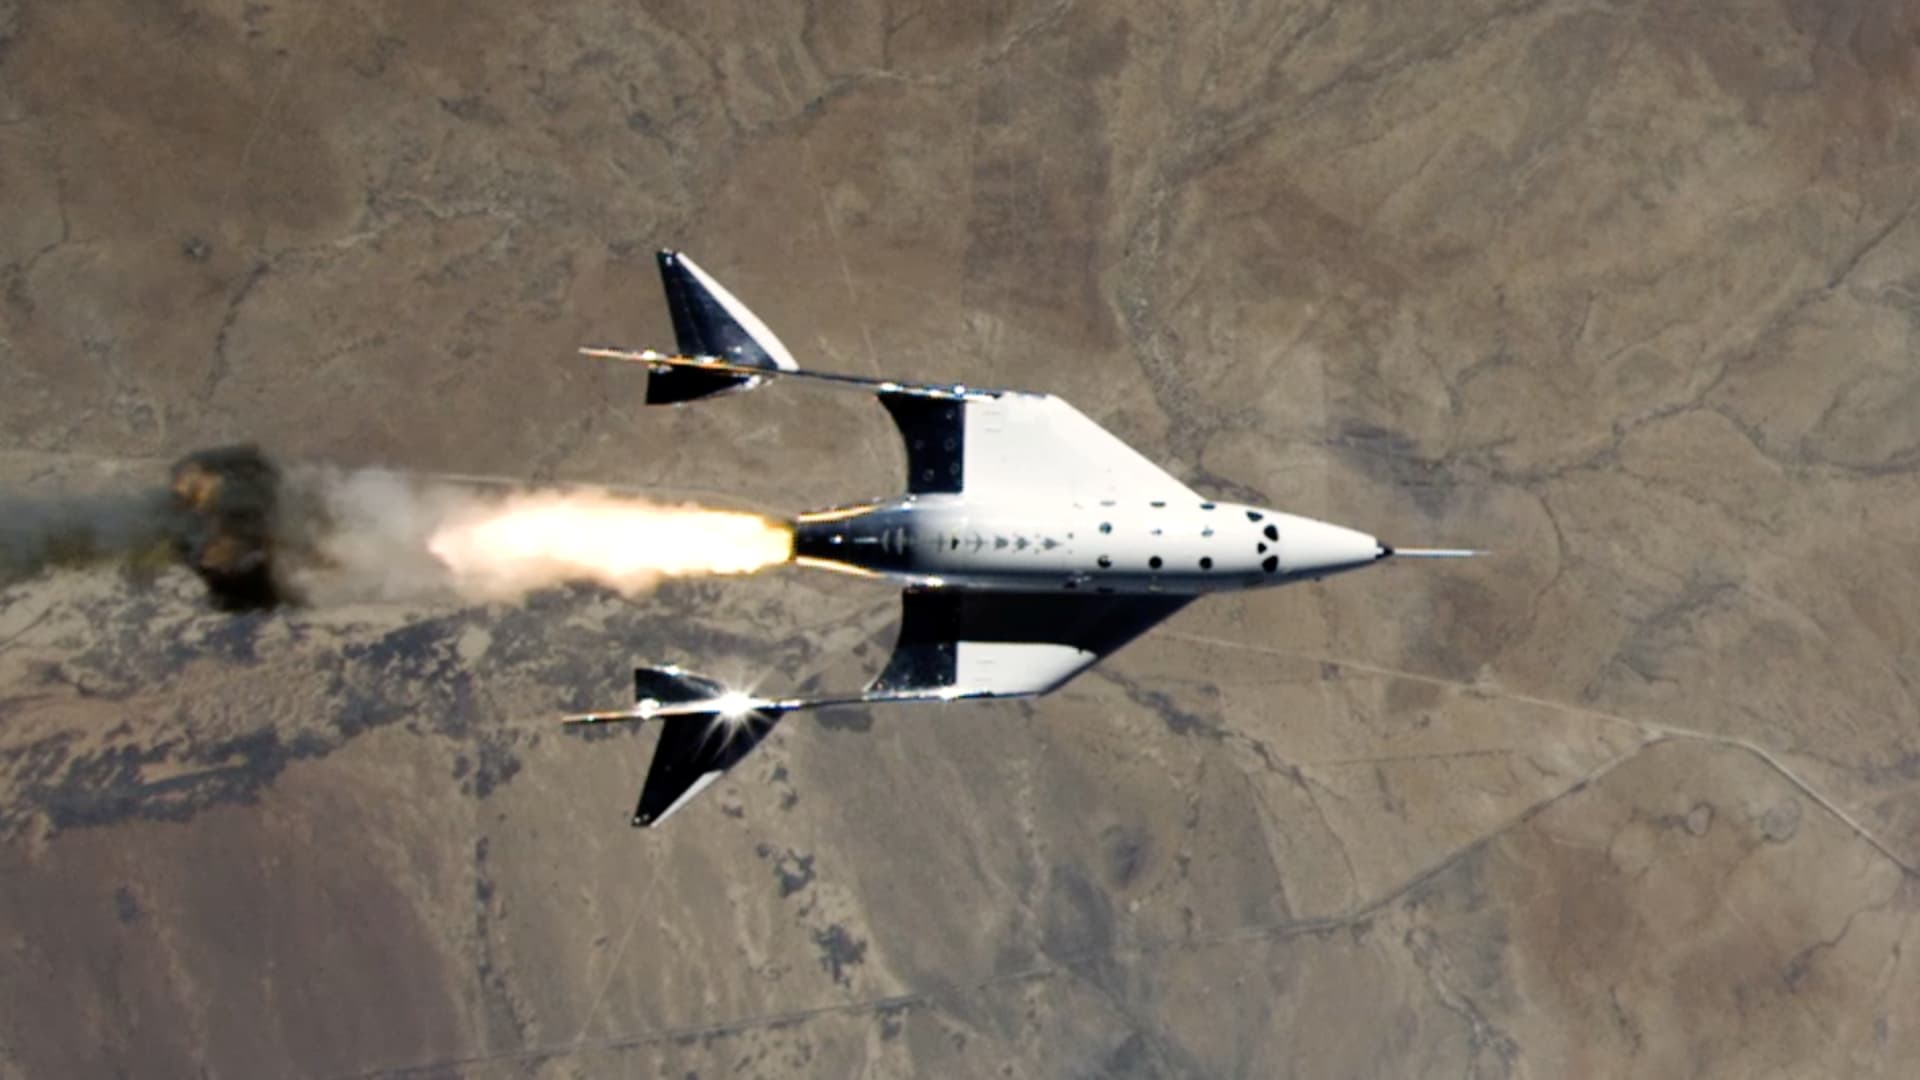 VSS Unity fires its rocket engine shortly after launching on its third spaceflight on May 22, 2021.